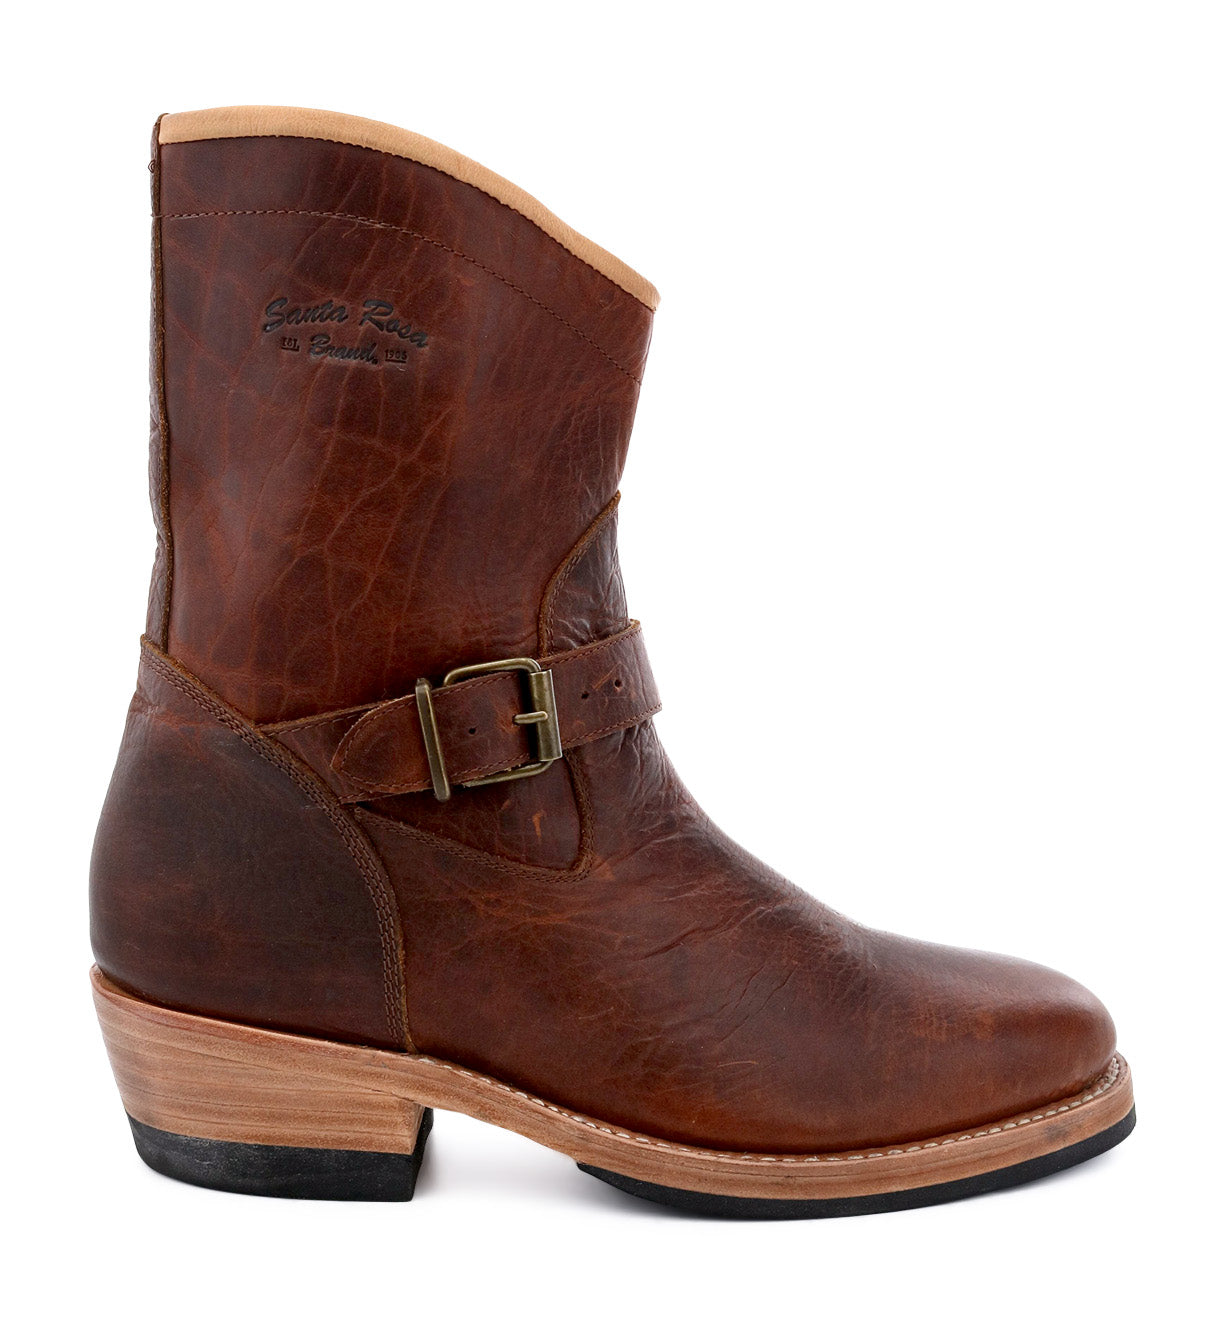 Santa Rosa Brand Carson Harness Boot in brown full grain leather with buckle detail.